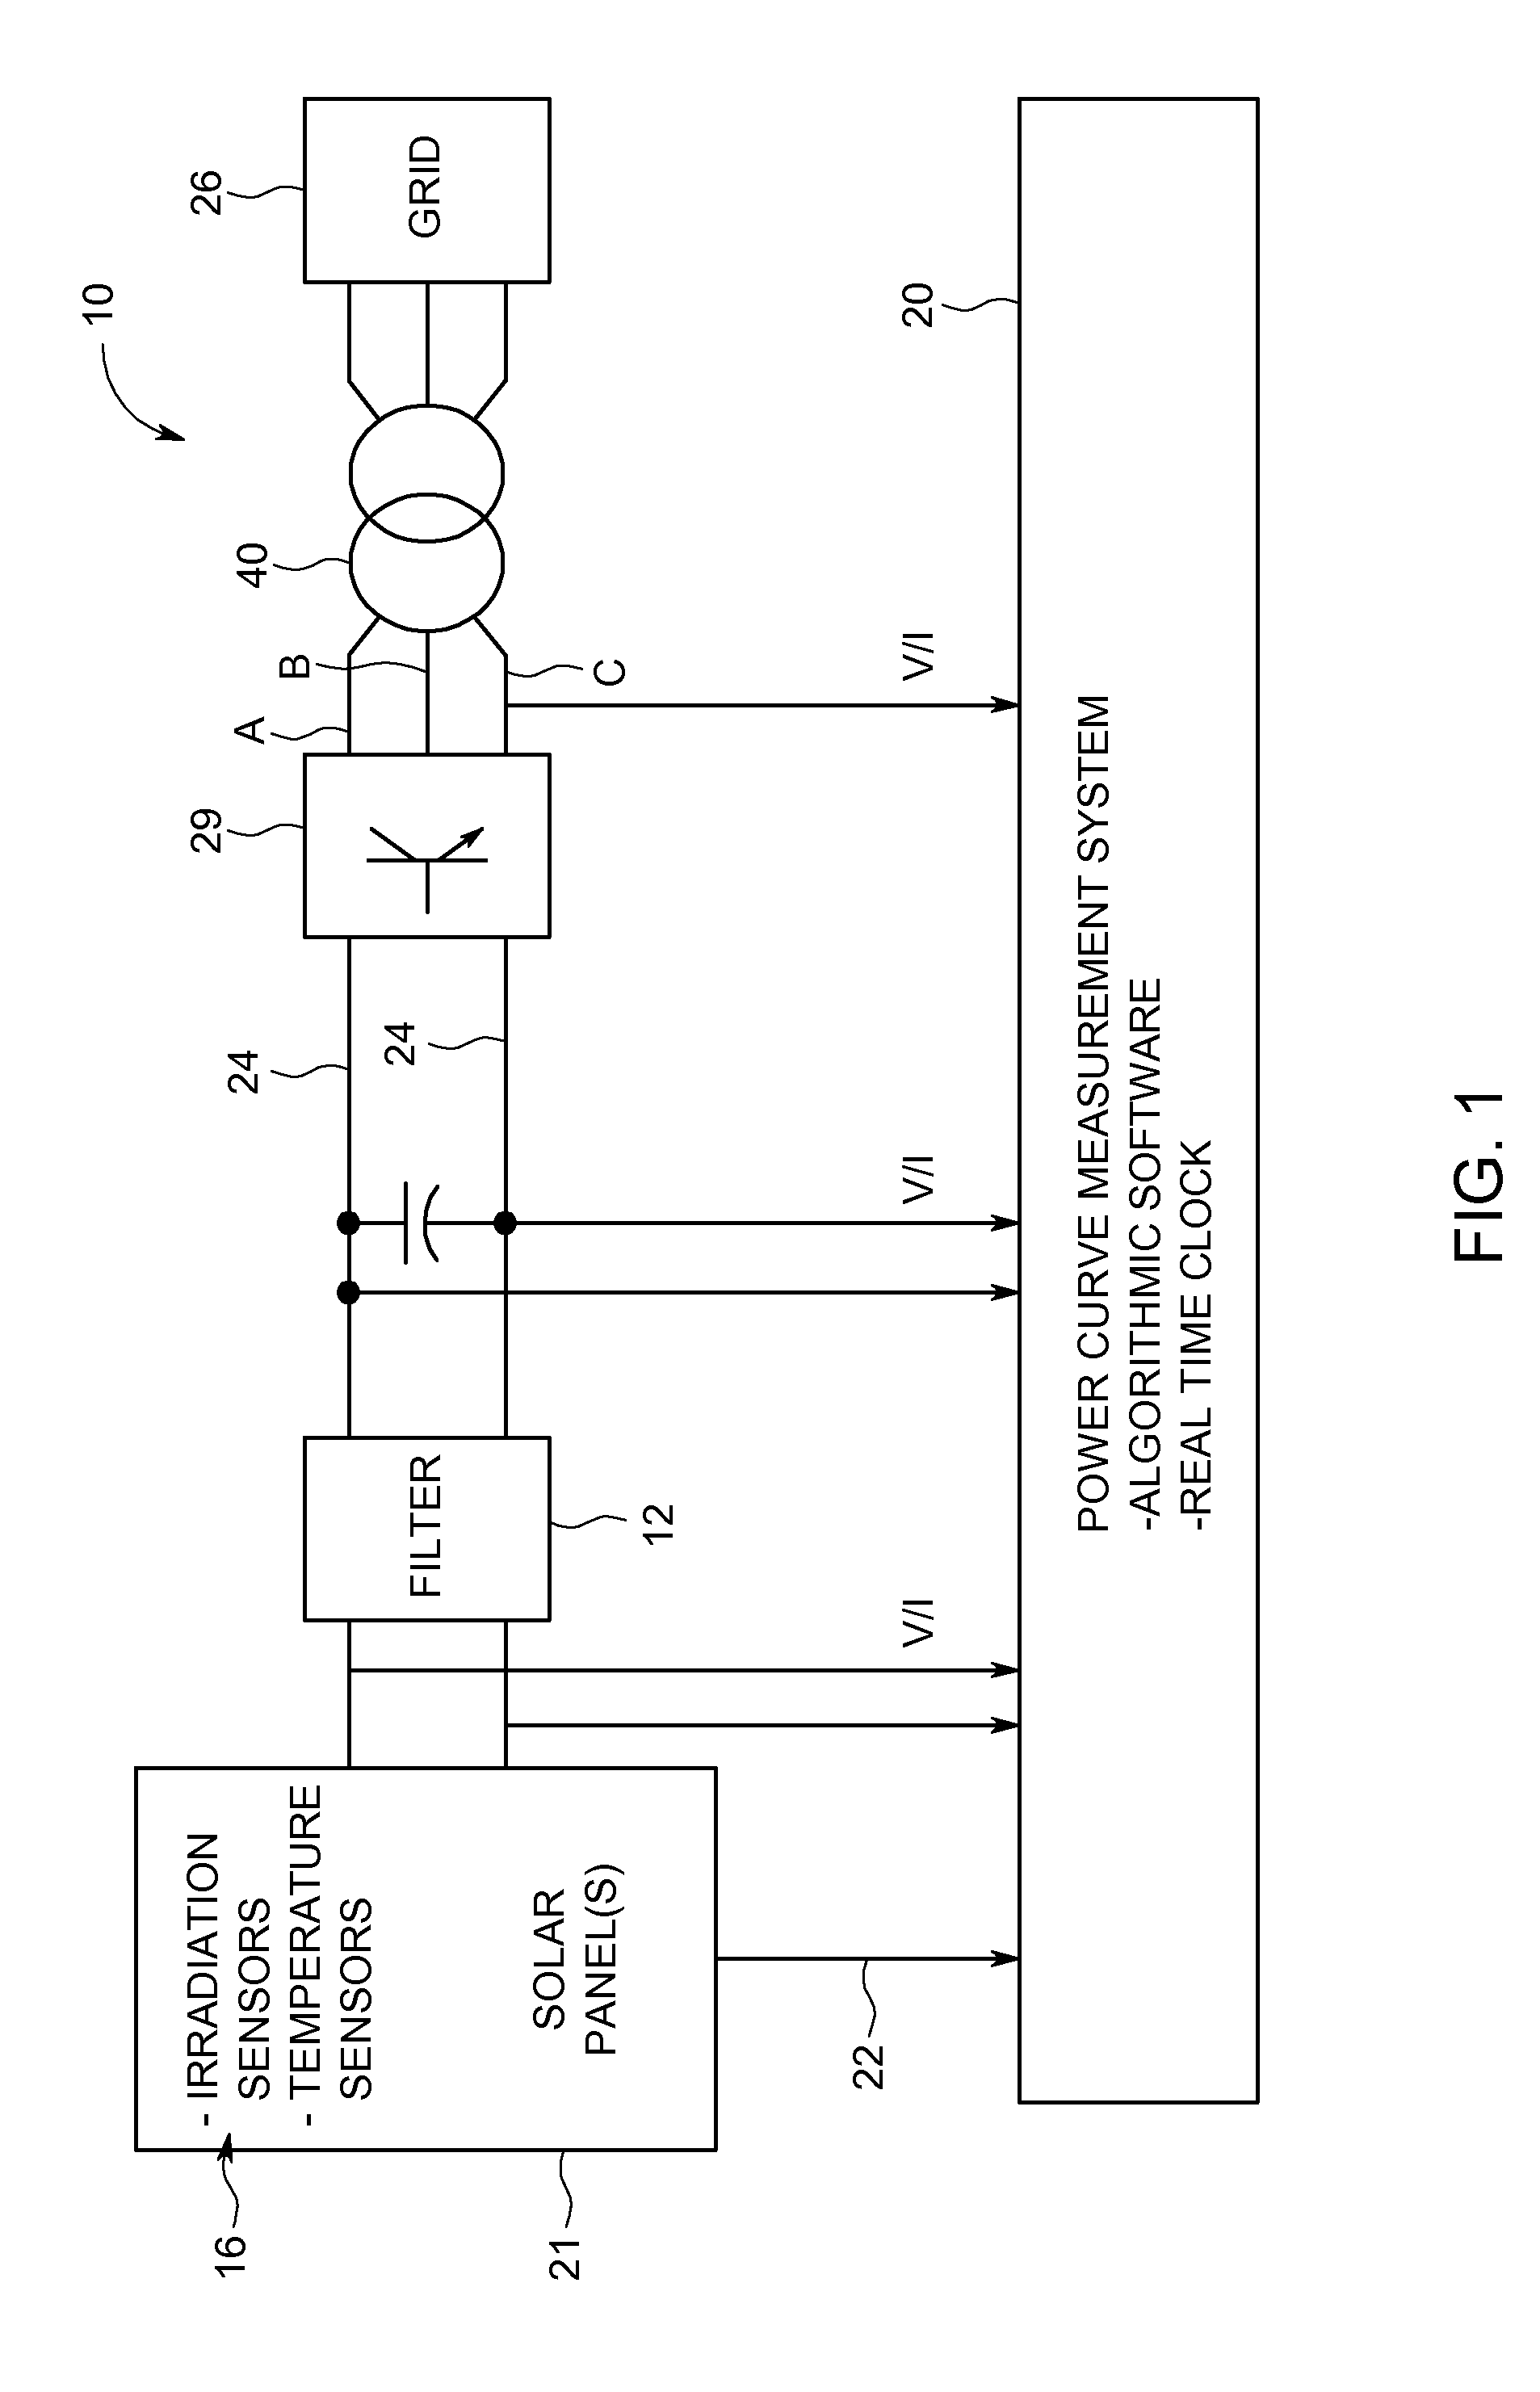 System and method for photovoltaic plant power curve measurement and health monitoring